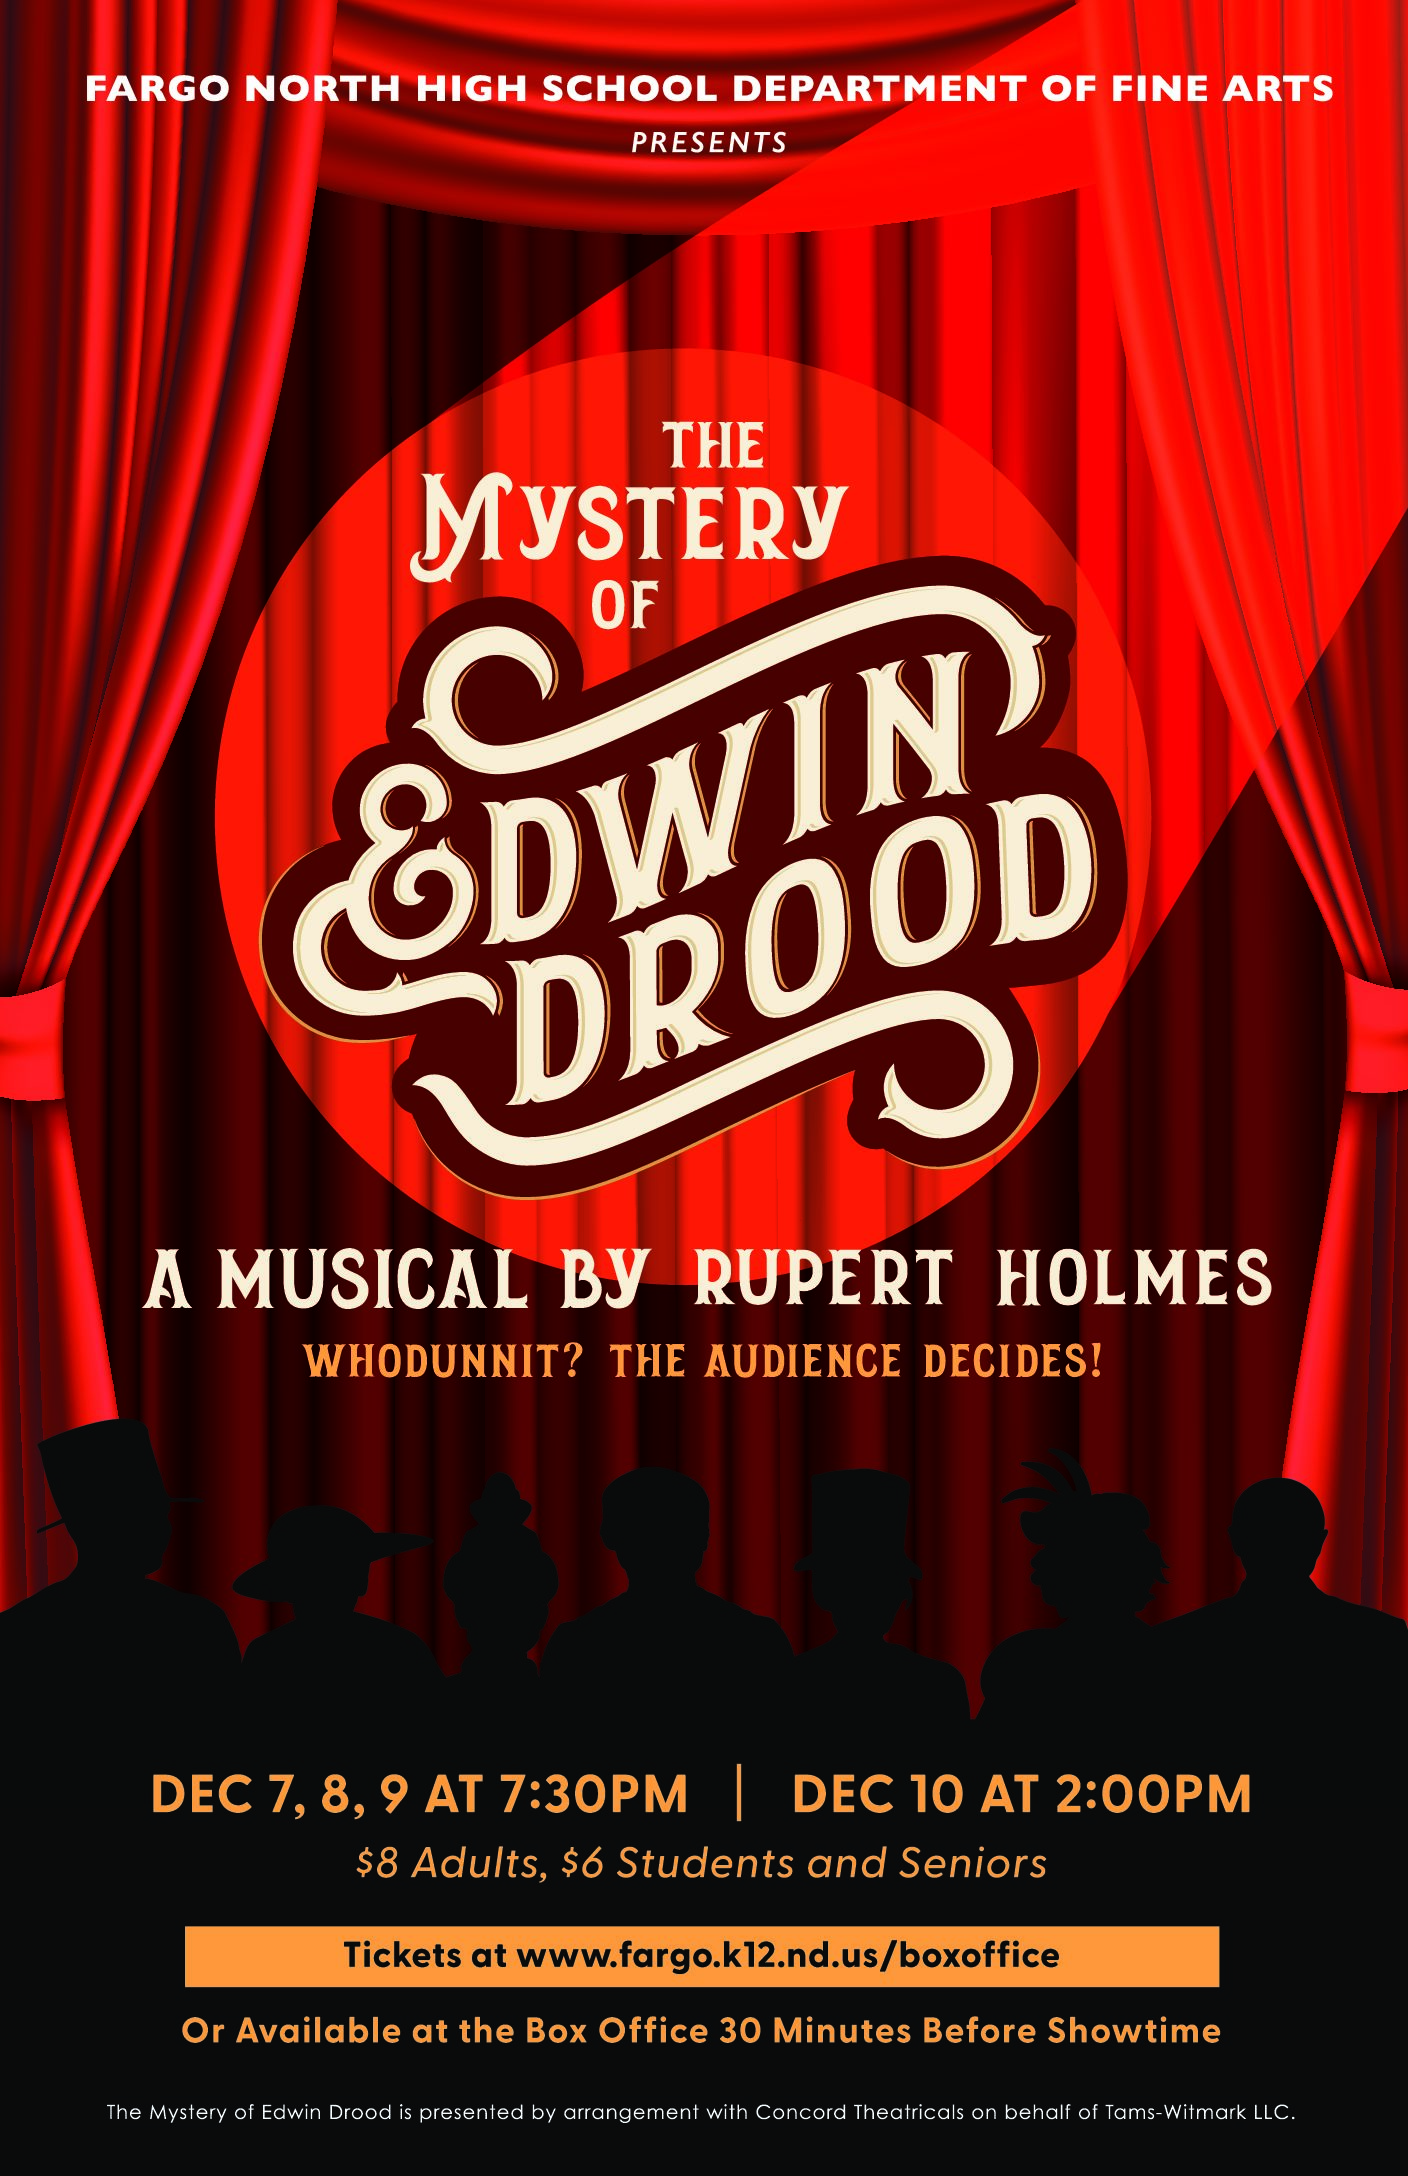 Fargo Norths poster for The Mystery of Edwin Drood.